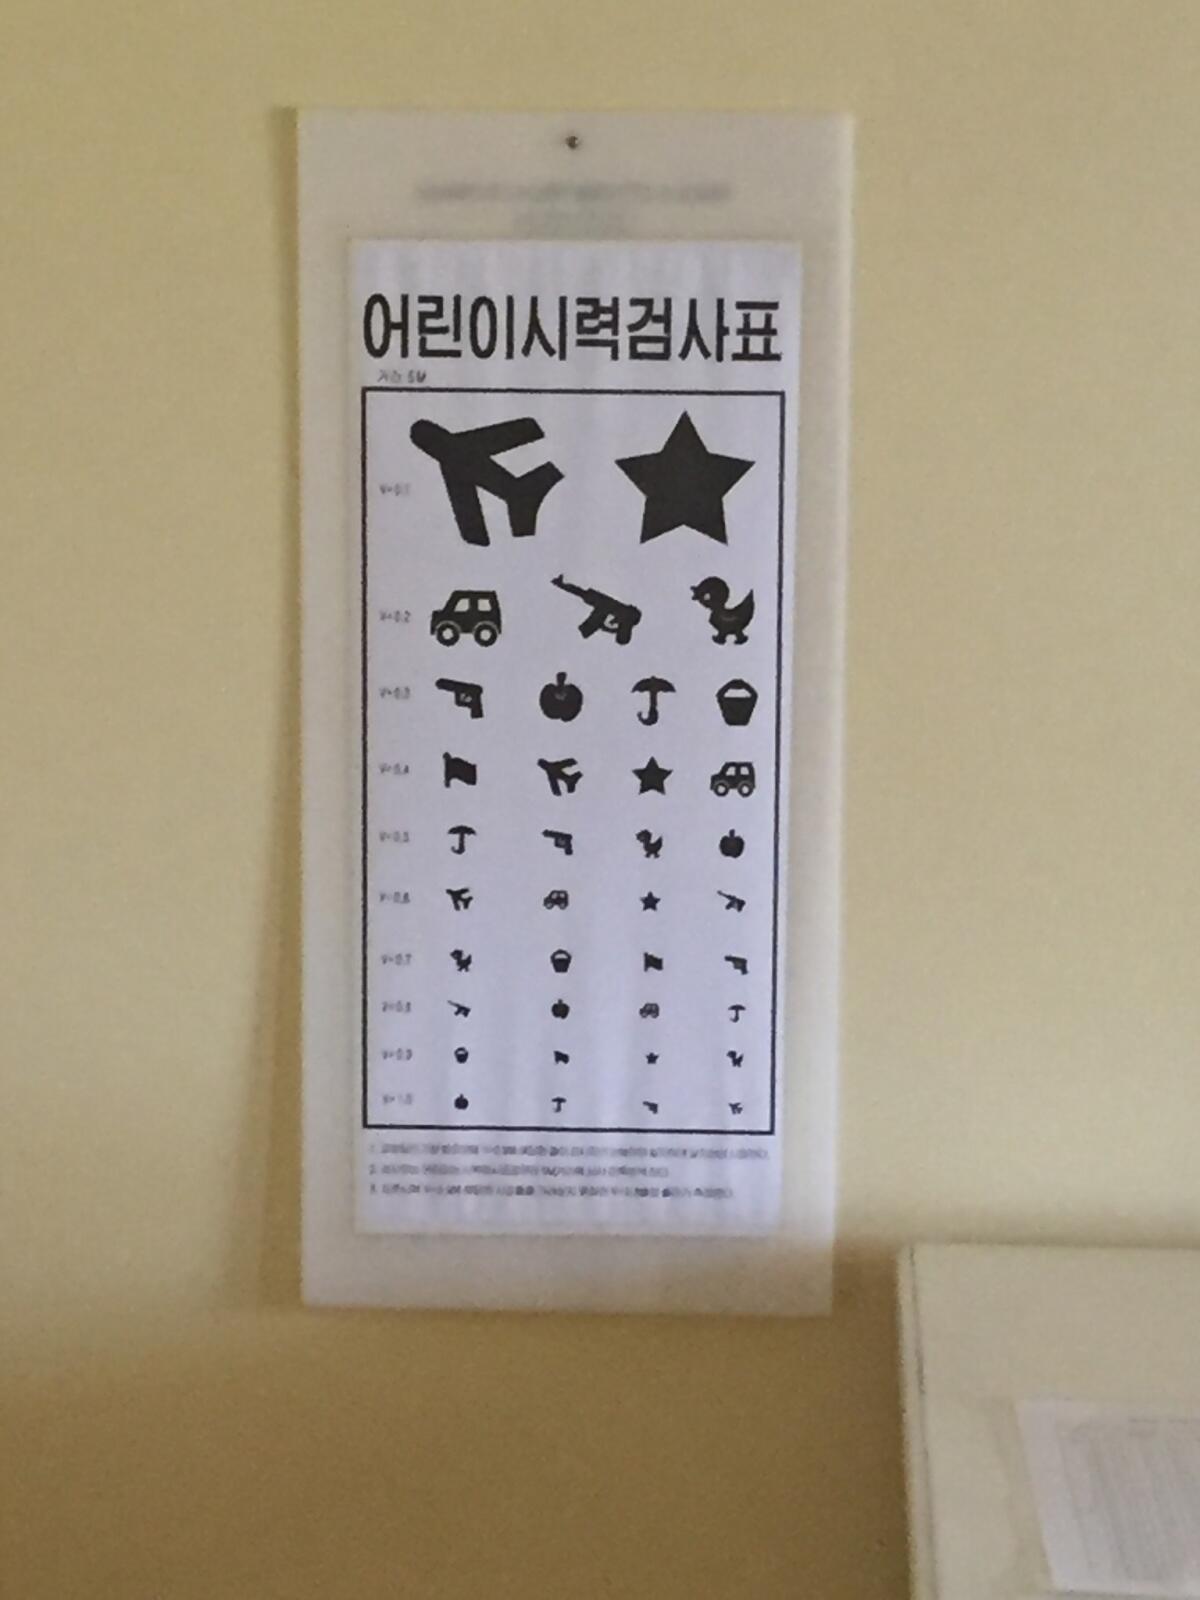 An eye chart at the nursery school includes rifles and pistols. (Julie Makinen / Los Angeles Times)